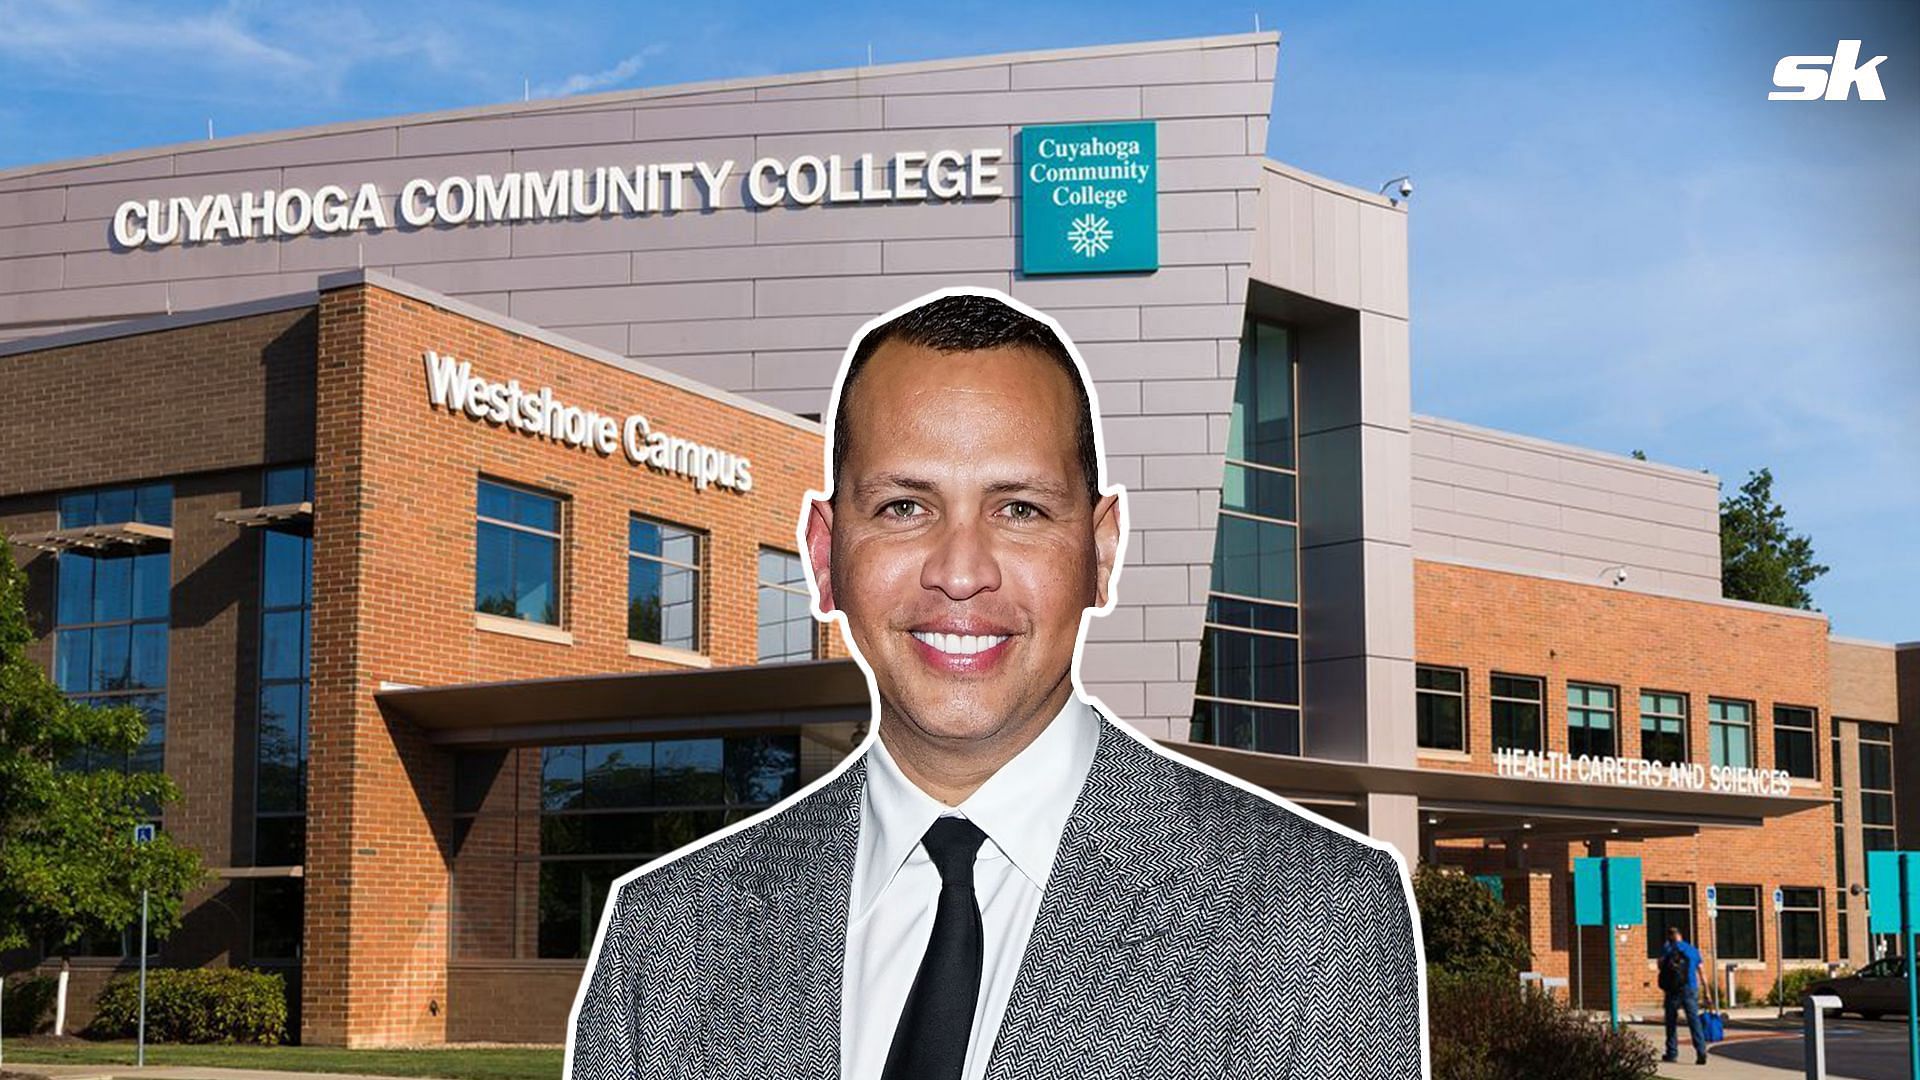 Alex Rodriguez reflects on keynote speech at Cuyahoga Community College, helps boost scholarship fund to $1100000: &quot;What an inspiring day&quot;